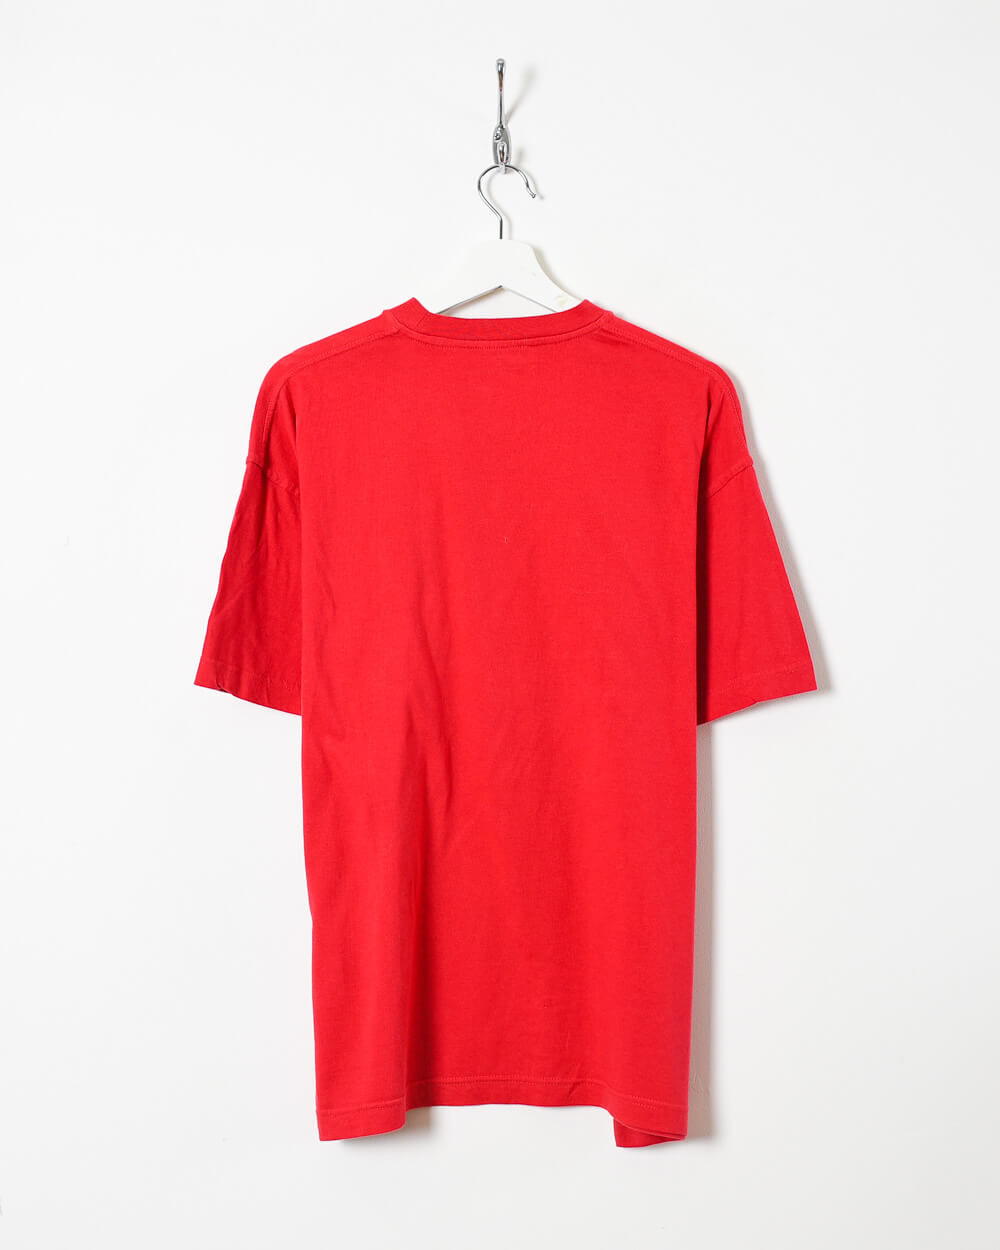 Red Versace Sporting T-Shirt - Large